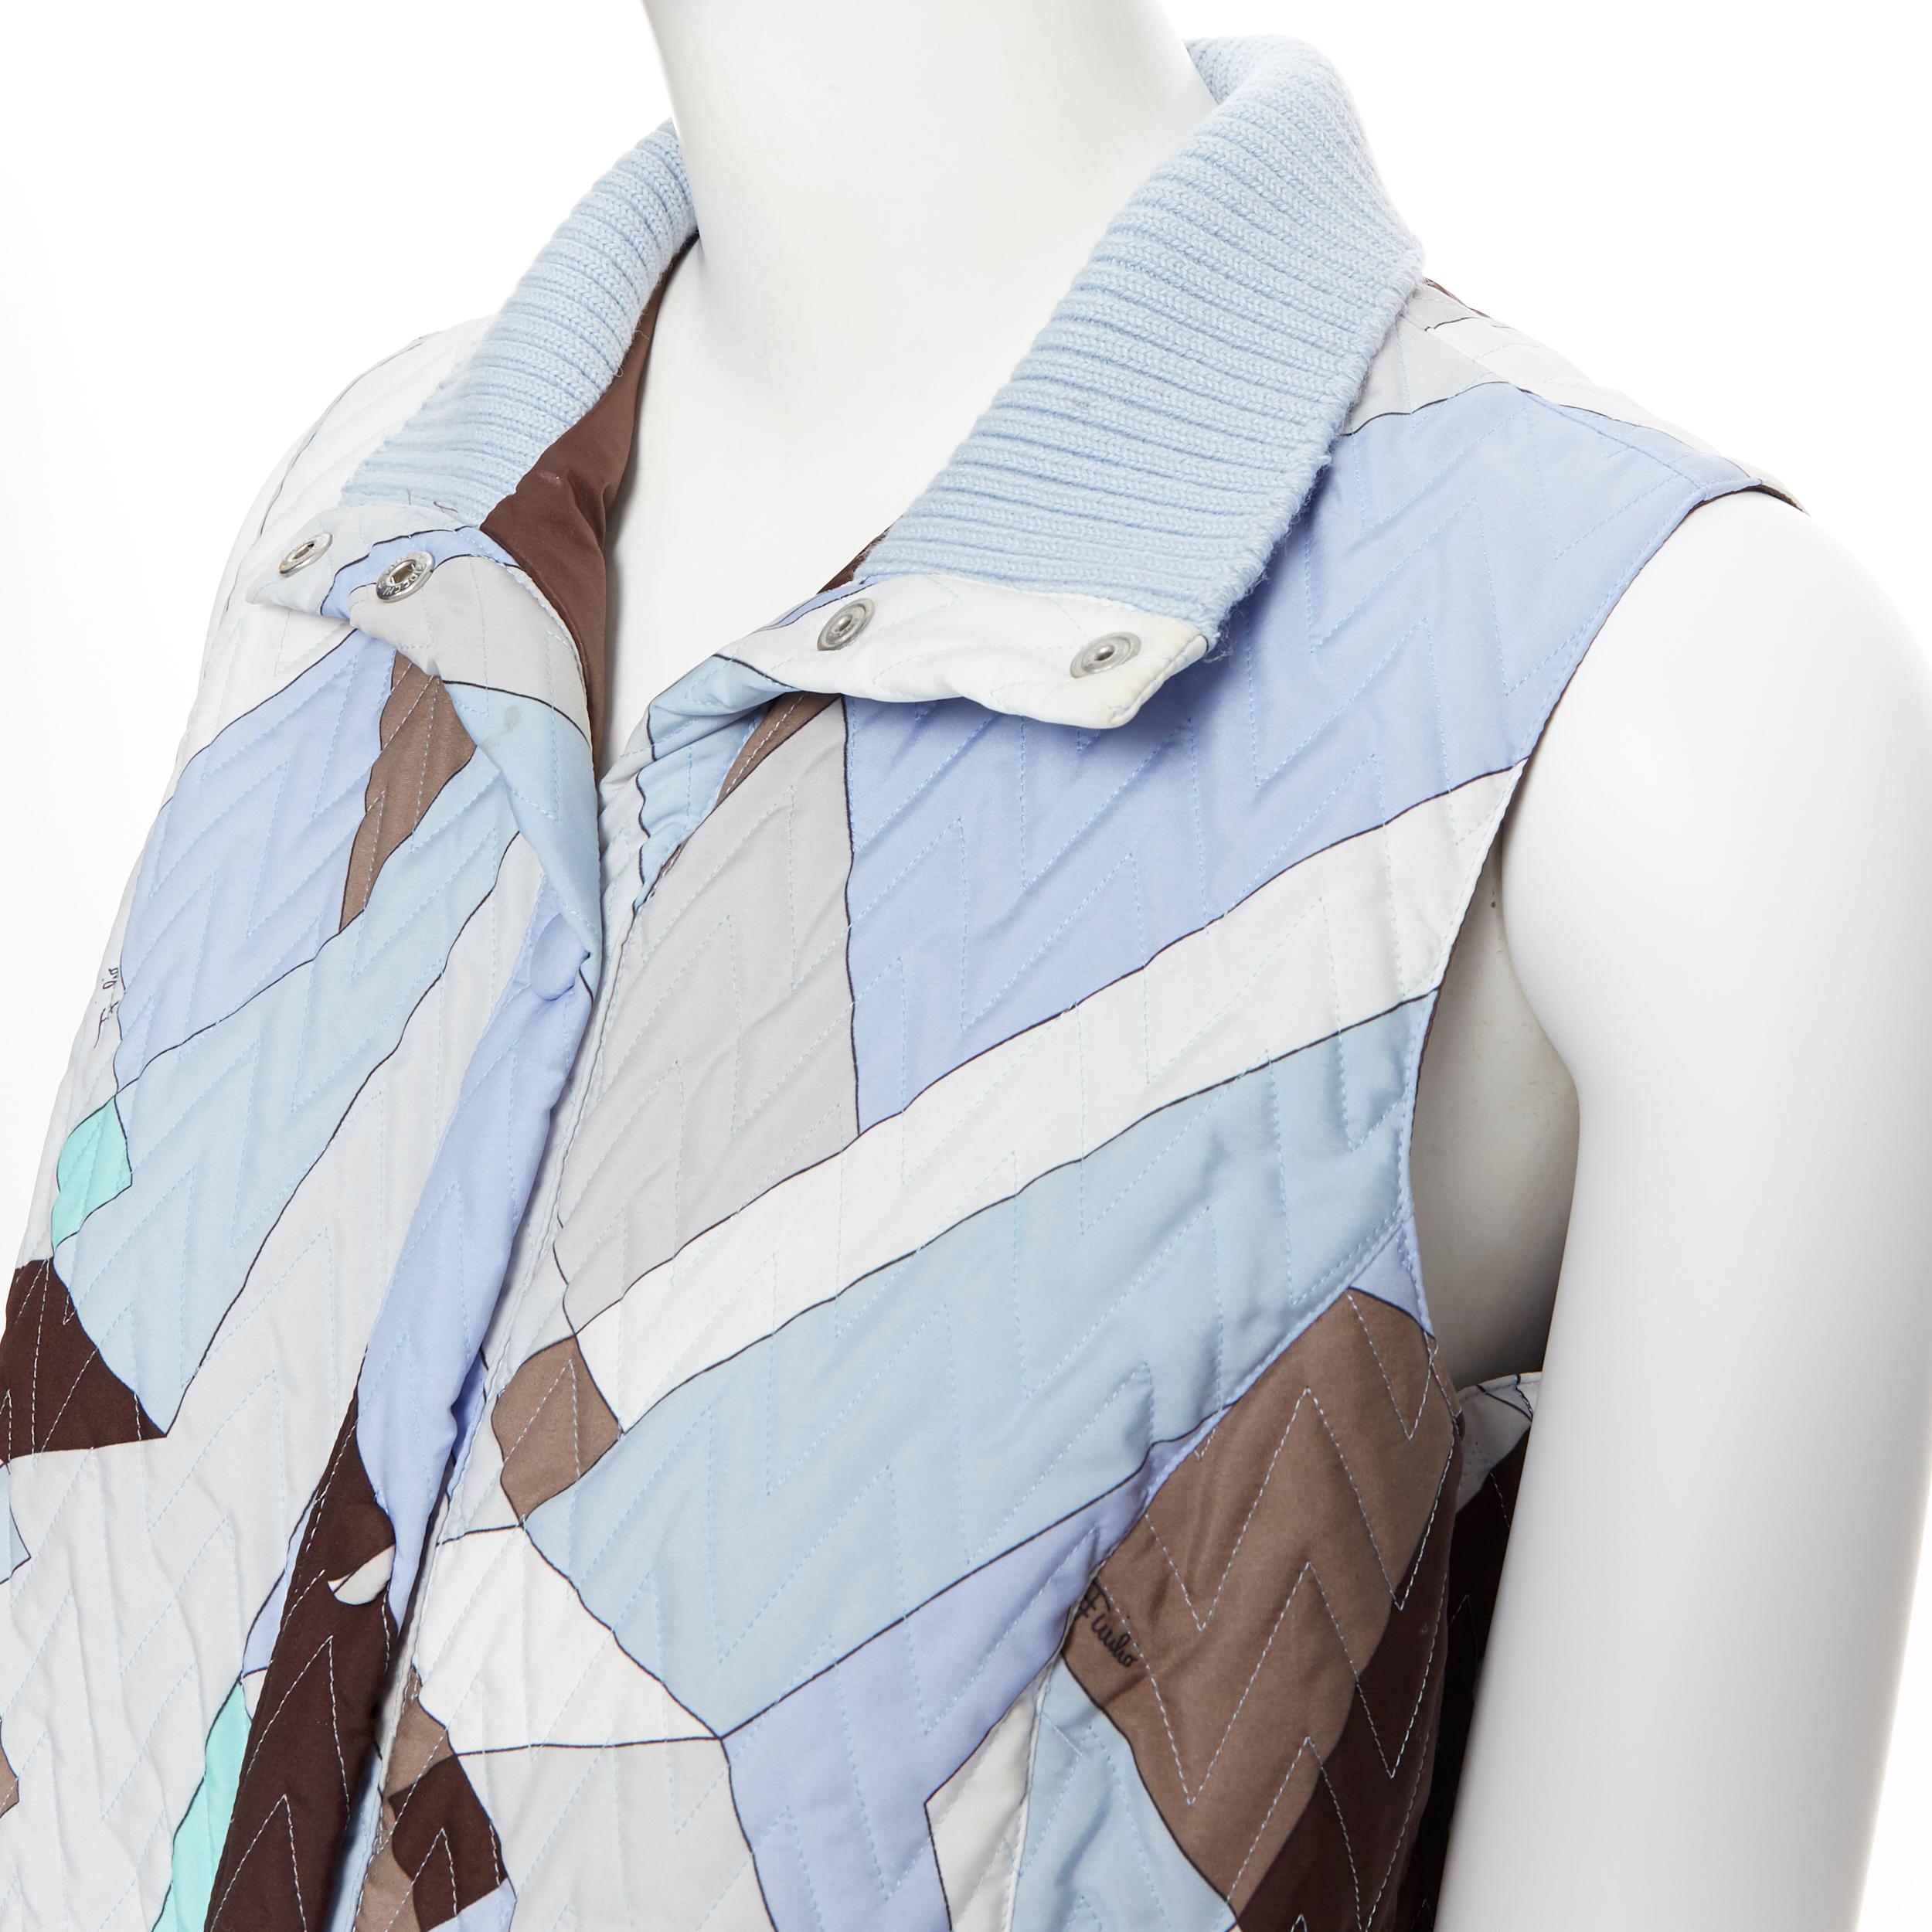 EMILIO PUCCI signature geometric print chevron stitching sleeveless vest IT44
Brand: Emilio Pucci 
Designer: Emilio Pucci 
Model Name / Style: Vest
Material: Polyester
Color: Blue
Pattern: Geometric
Closure: Button
Extra Detail: Sleeveless.
Made in: